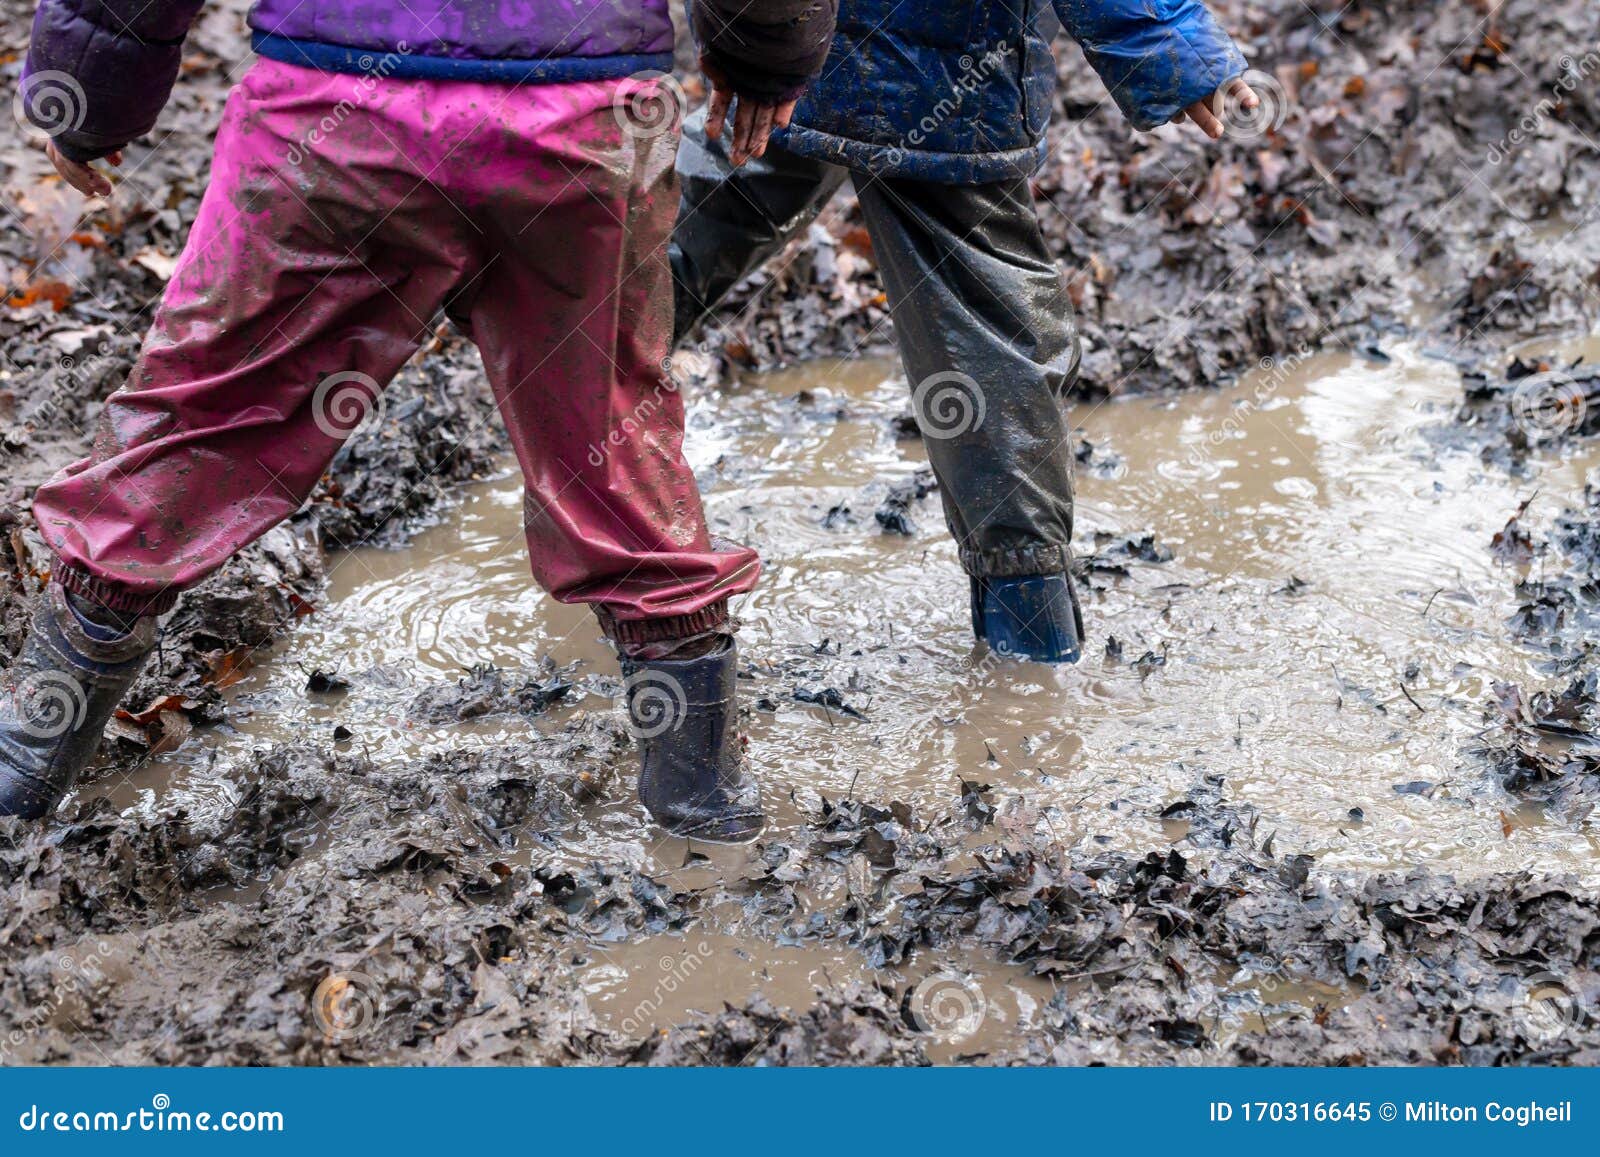 Young Children Playing In A Mud Puddle Stock Photo - Image 